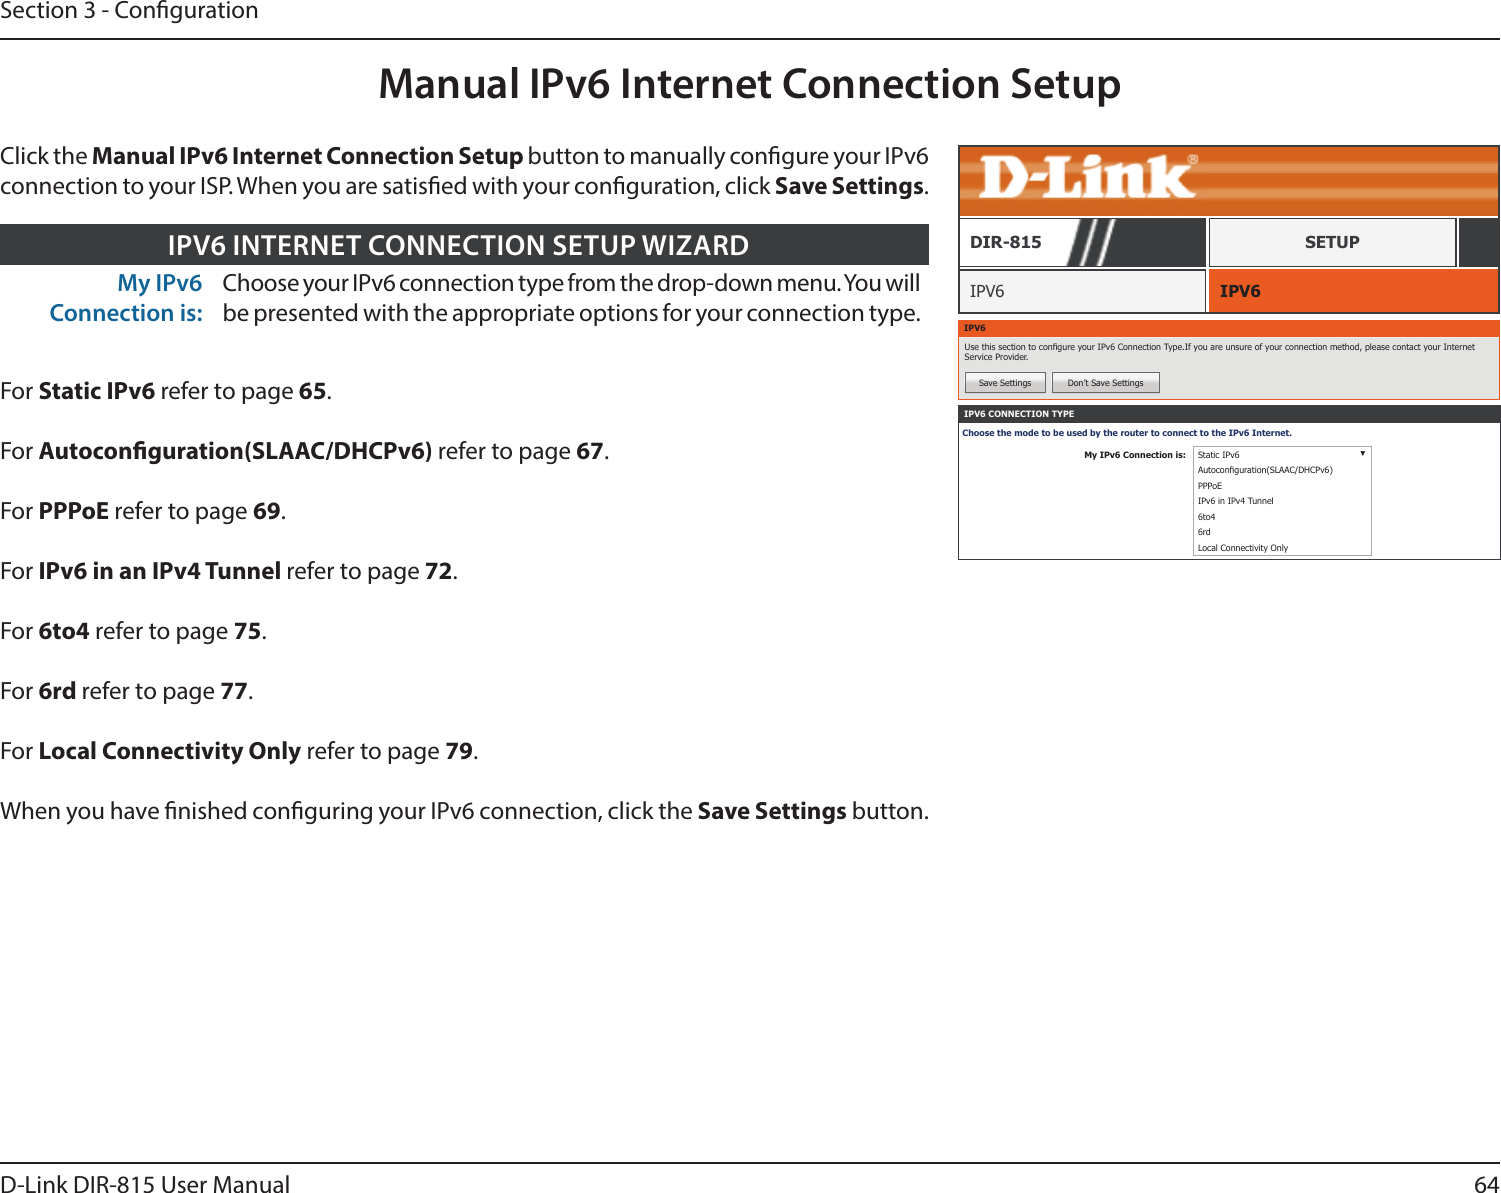 64D-Link DIR-815 User ManualSection 3 - CongurationManual IPv6 Internet Connection SetupIPV6 IPV6DIR-815 SETUPIPV6Use this section to congure your IPv6 Connection Type.If you are unsure of your connection method, please contact your Internet Service Provider.Save Settings Don’t Save SettingsIPV6 CONNECTION TYPEChoose the mode to be used by the router to connect to the IPv6 Internet.My IPv6 Connection is: Static IPv6 ▼Autoconguration(SLAAC/DHCPv6)PPPoEIPv6 in IPv4 Tunnel6to46rdLocal Connectivity OnlyMy IPv6 Connection is:Choose your IPv6 connection type from the drop-down menu. You will be presented with the appropriate options for your connection type.IPV6 INTERNET CONNECTION SETUP WIZARDFor Static IPv6 refer to page 65.For Autoconguration(SLAAC/DHCPv6) refer to page 67.For PPPoE refer to page 69.For IPv6 in an IPv4 Tunnel refer to page 72.For 6to4 refer to page 75.For 6rd refer to page 77.For Local Connectivity Only refer to page 79.When you have nished conguring your IPv6 connection, click the Save Settings button.Click the Manual IPv6 Internet Connection Setup button to manually congure your IPv6 connection to your ISP. When you are satised with your conguration, click Save Settings.